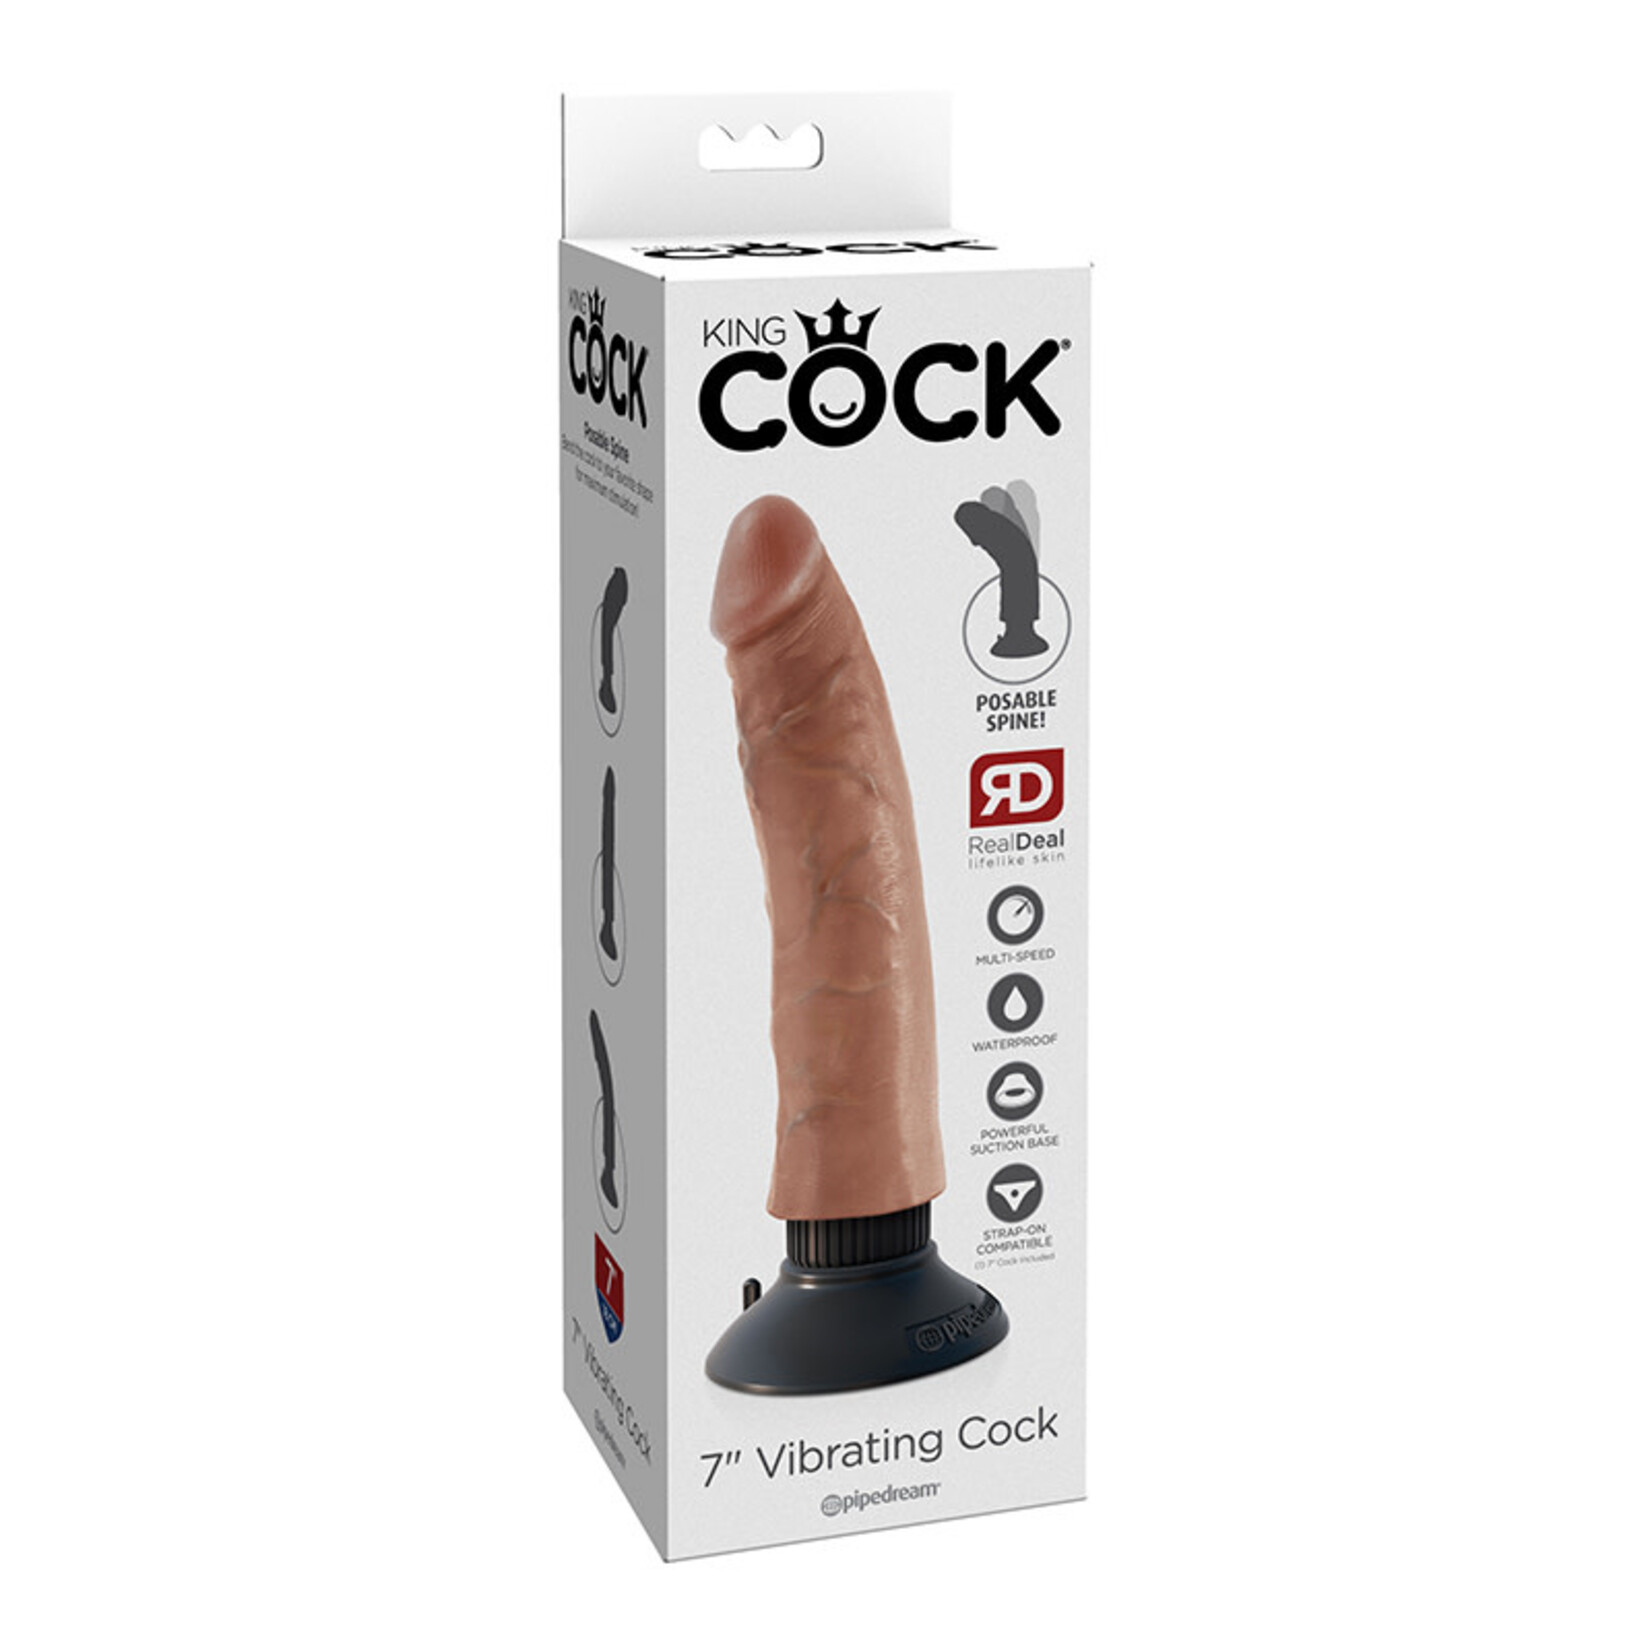 KING COCK KING COCK 7 INCH VIBRATING SUCTION CUP DILDO